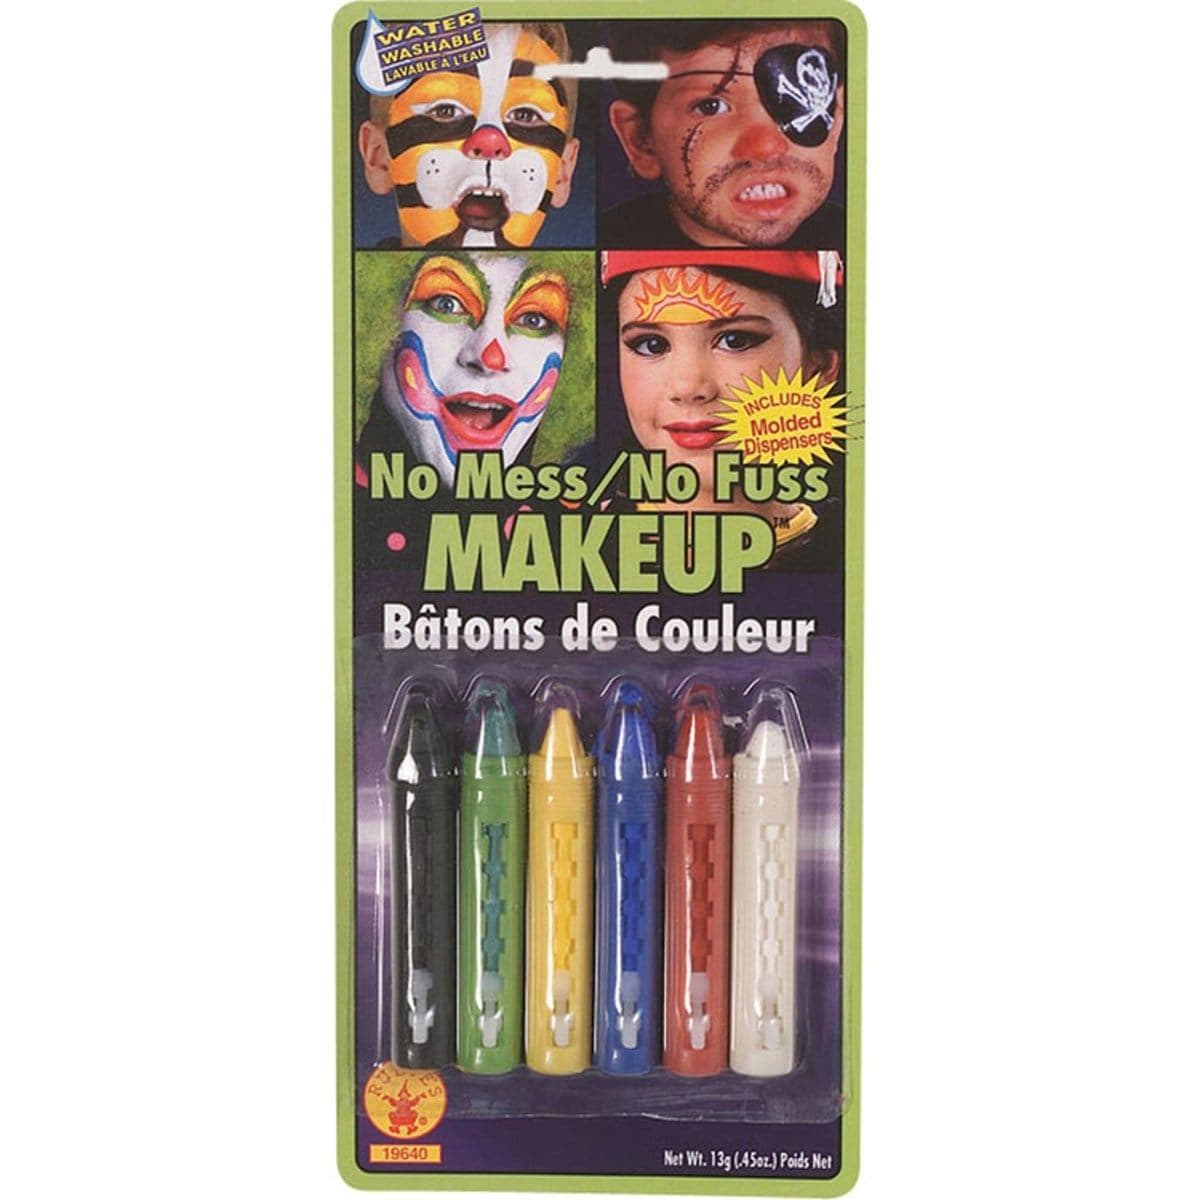 Buy Costume Accessories Makeup sticks, 6 per package sold at Party Expert